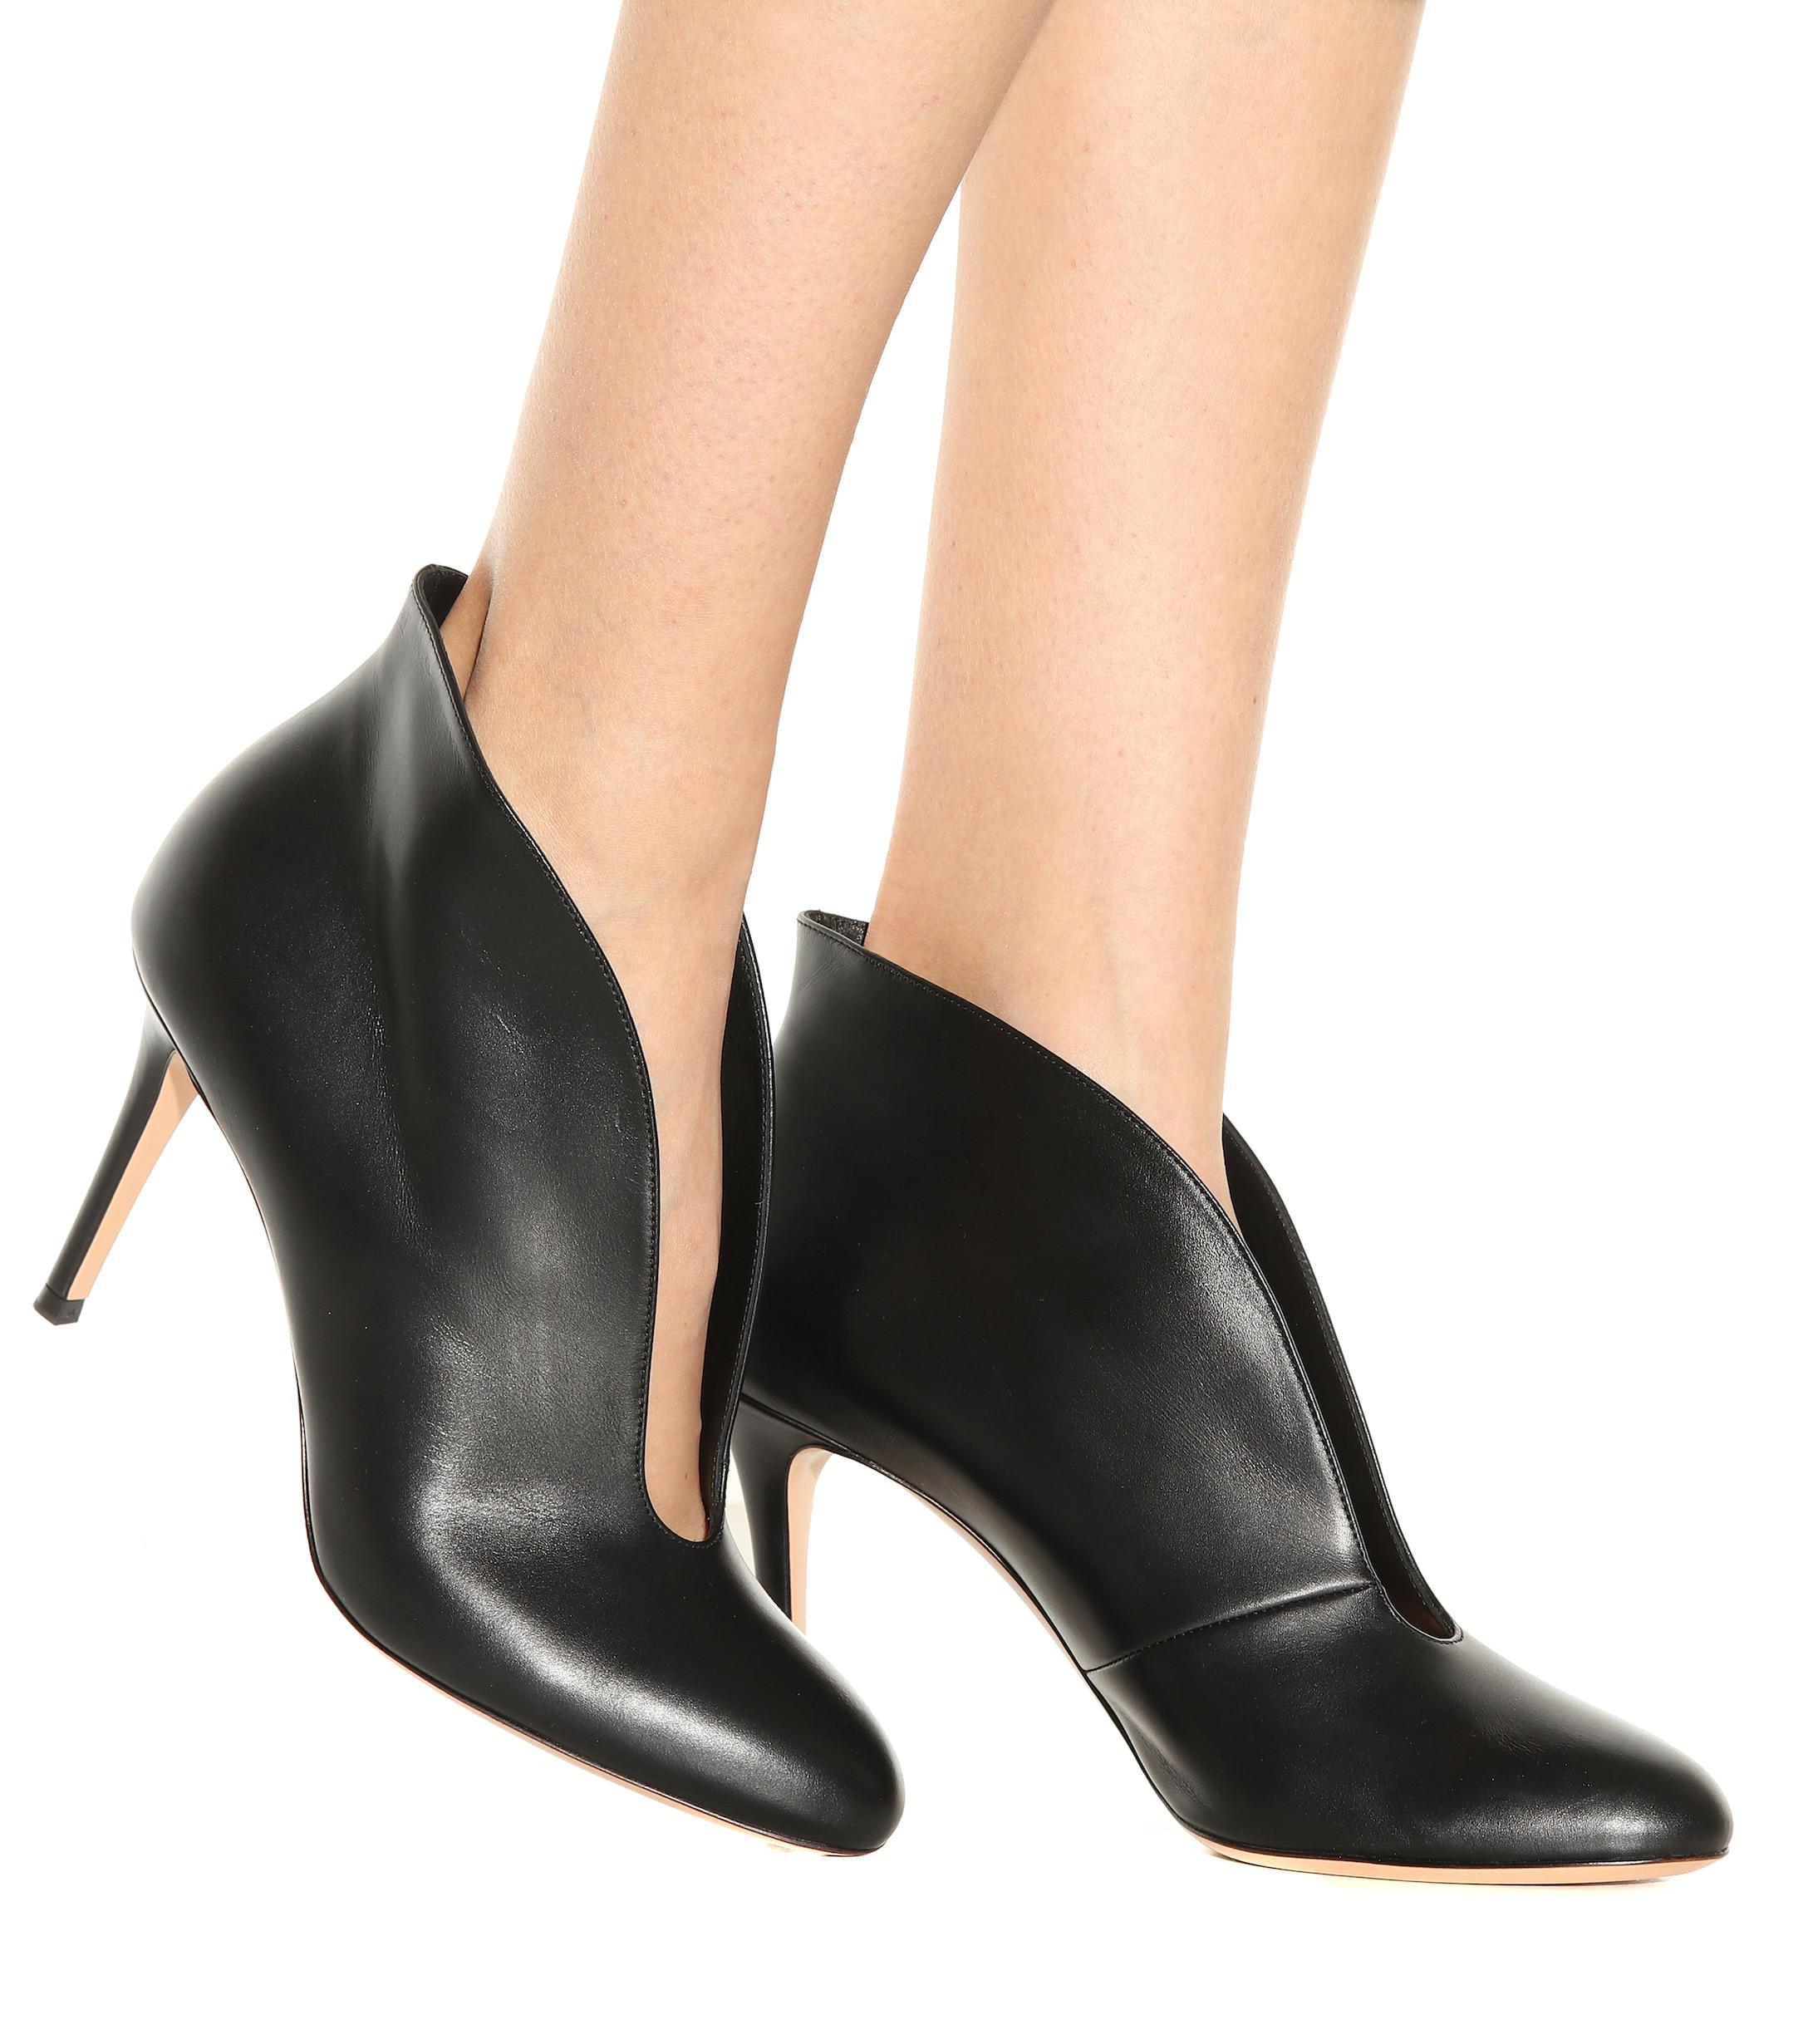 Gianvito Rossi Vamp 85 Leather Ankle Boots in Black - Lyst